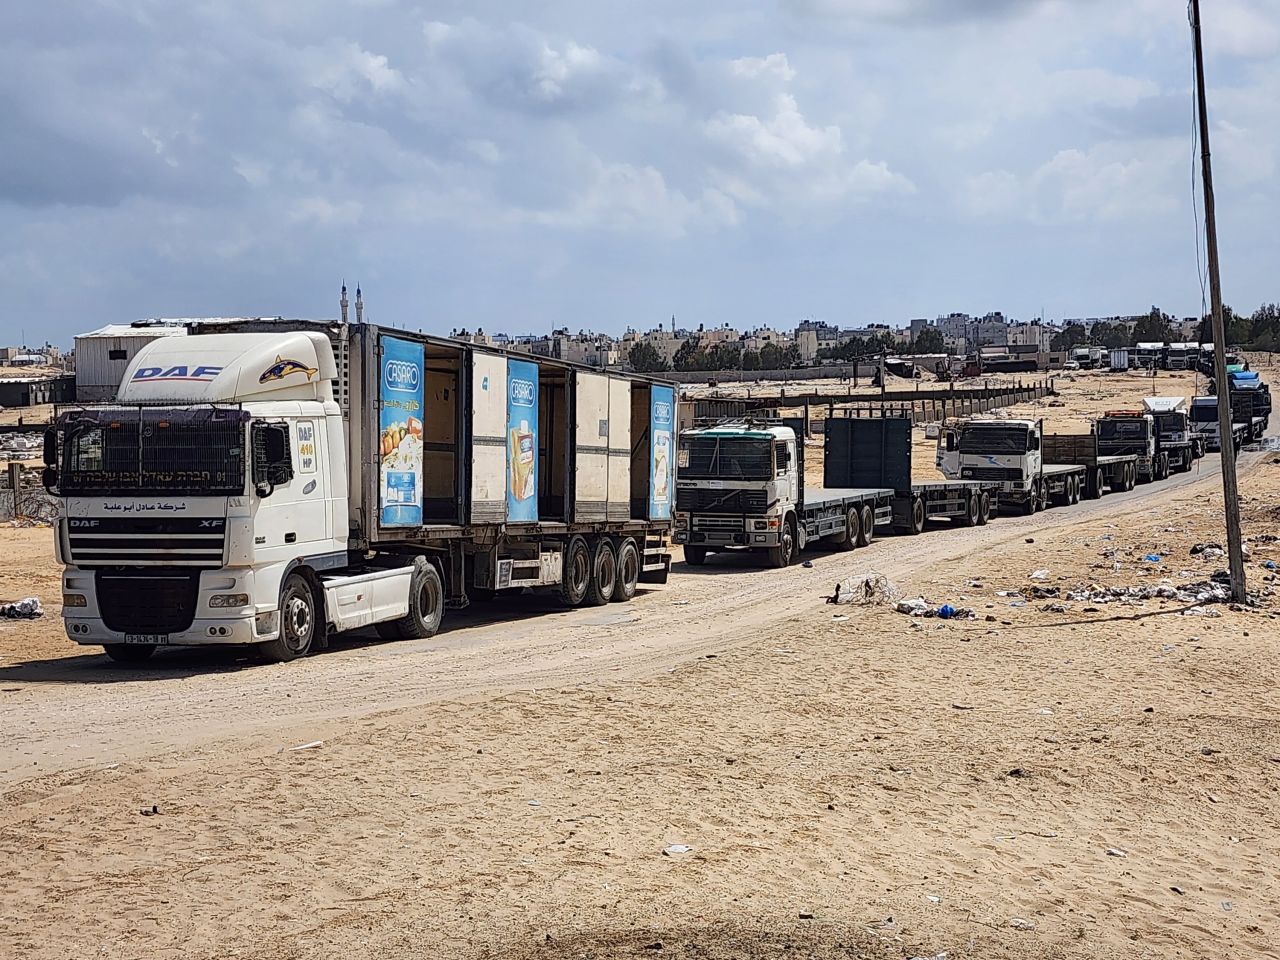 Palestinian truck drivers and United Nations vehicles wait near the Rafah border gate on the Gazan side to cross into the Egyptian side on Tuesday.